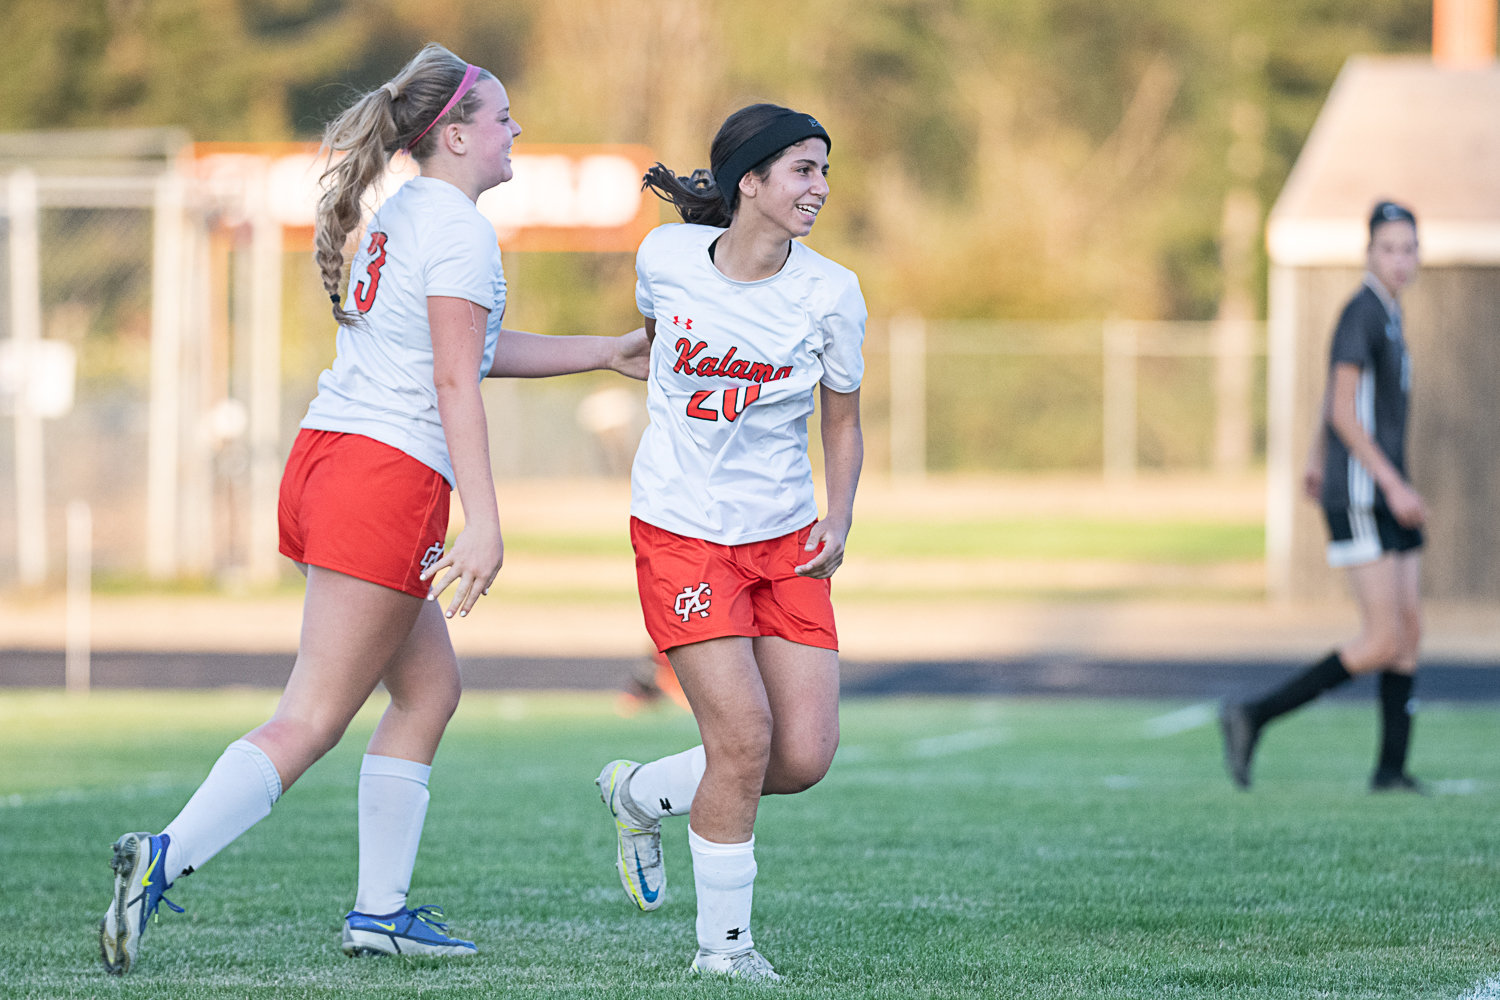 Kalama eighth grader Sienna DiCristina celebrates after her goal in the 35th minute against Napavine Sept. 19.